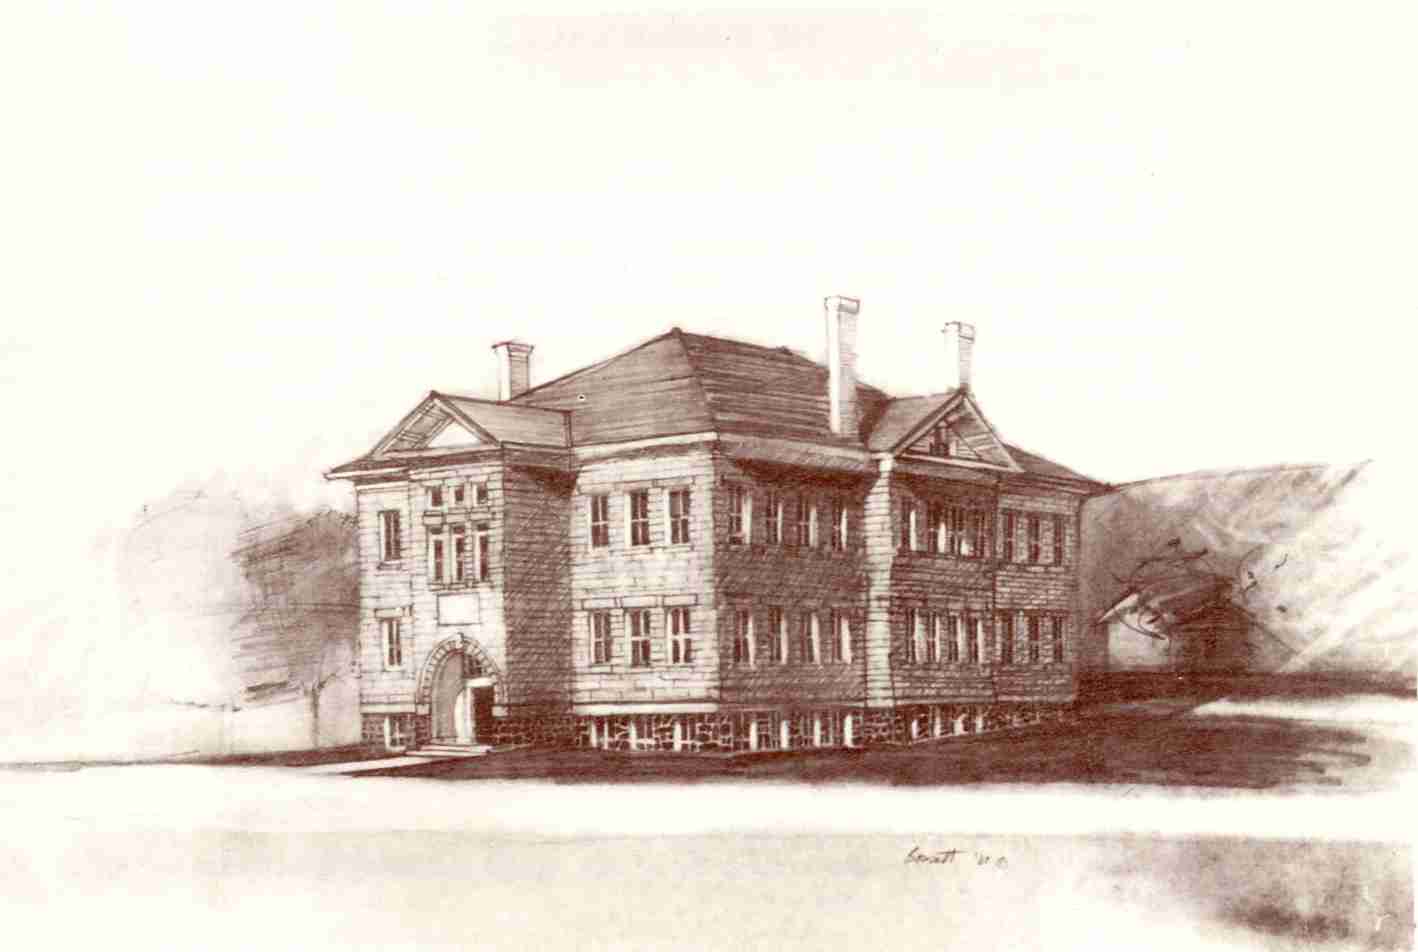 Sketch of the Dixie Academy Building